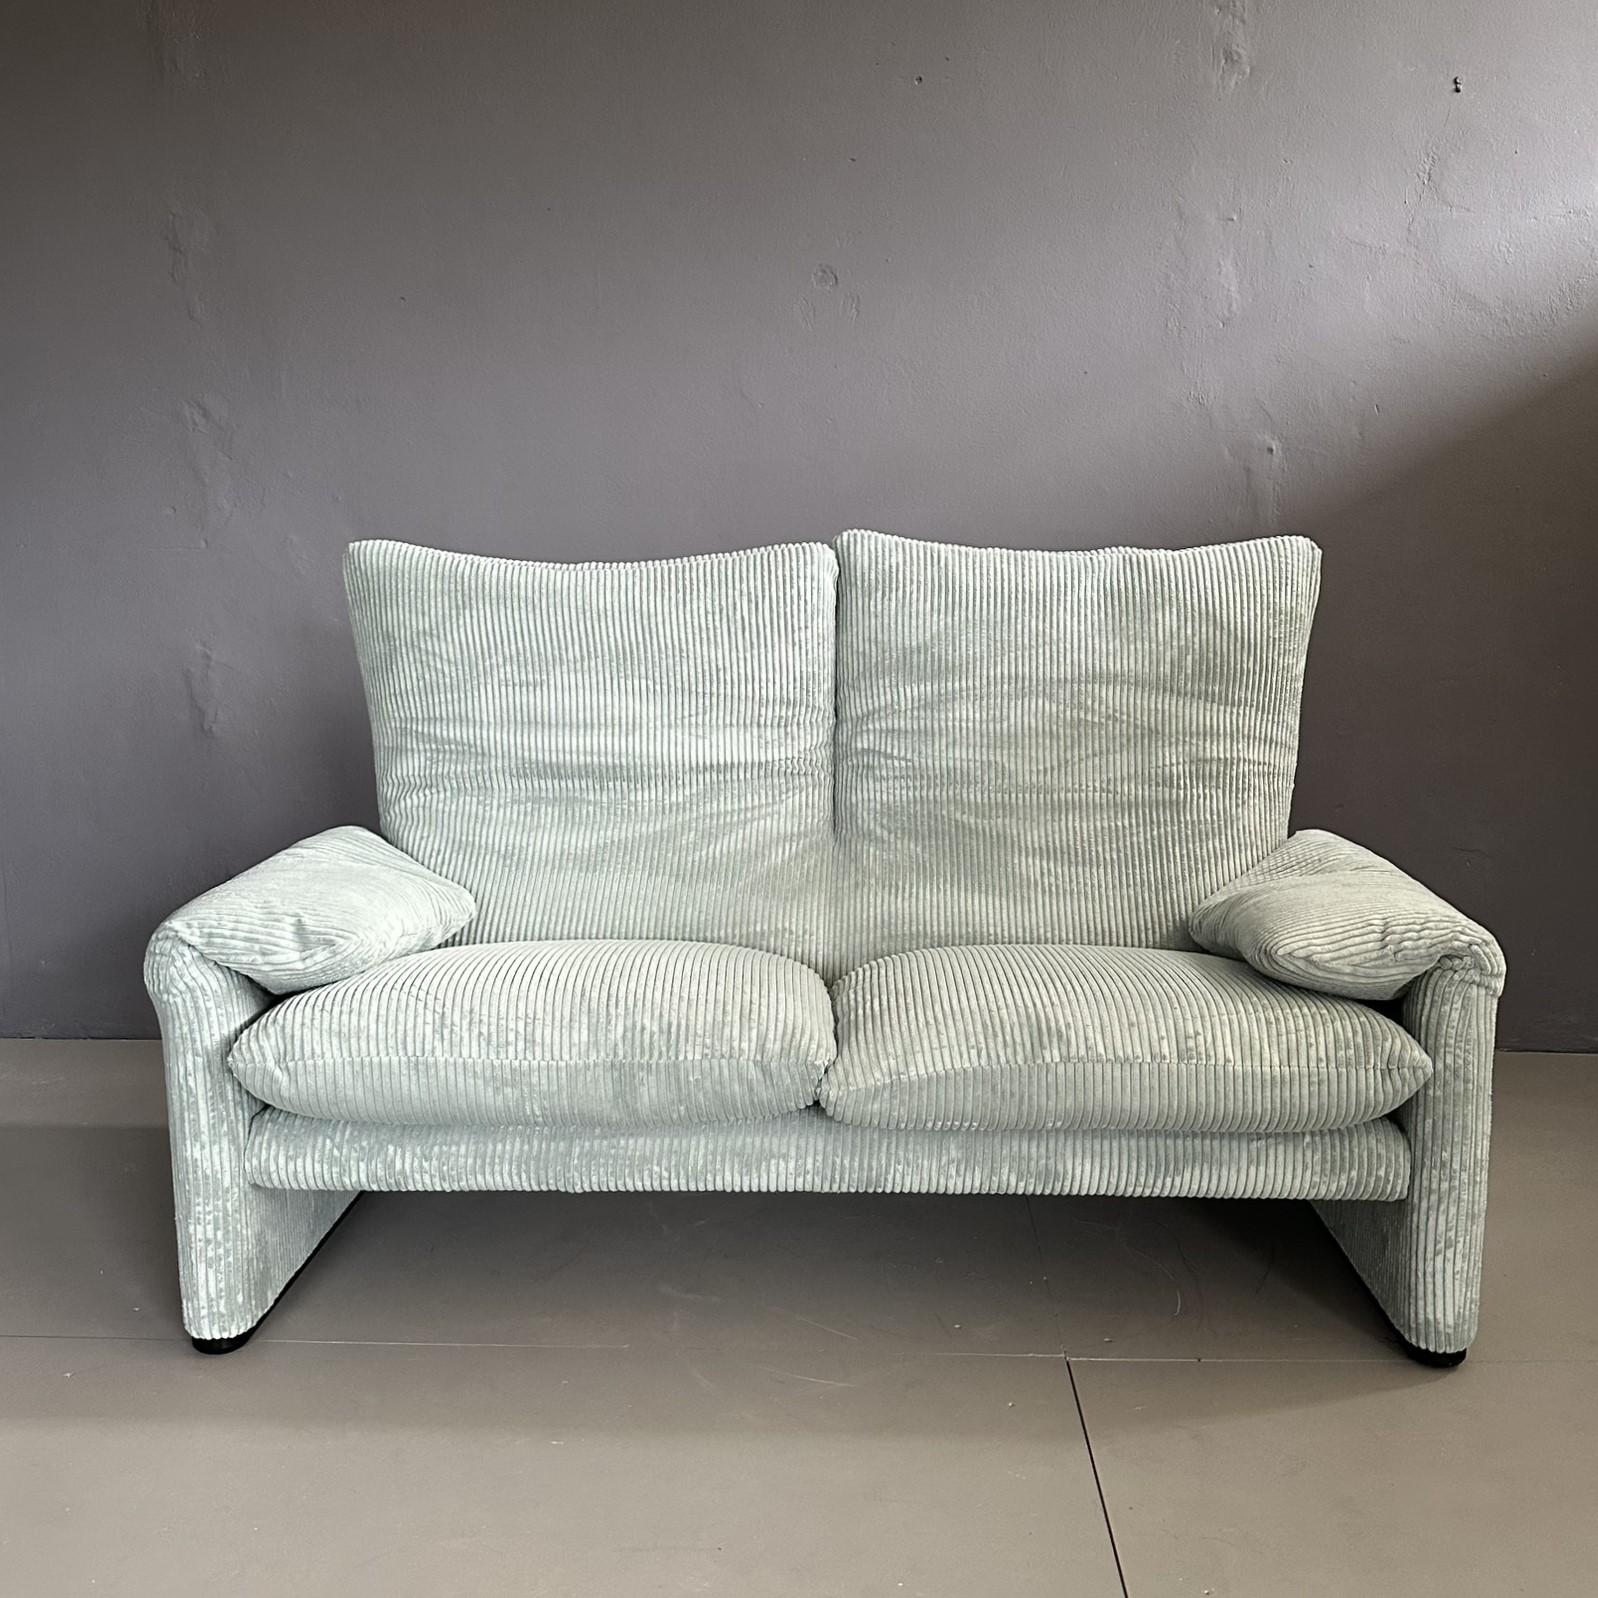 Late 20th Century  Maralunga 2-seater sofa by Vico Magistretti for Cassina from the 70s For Sale